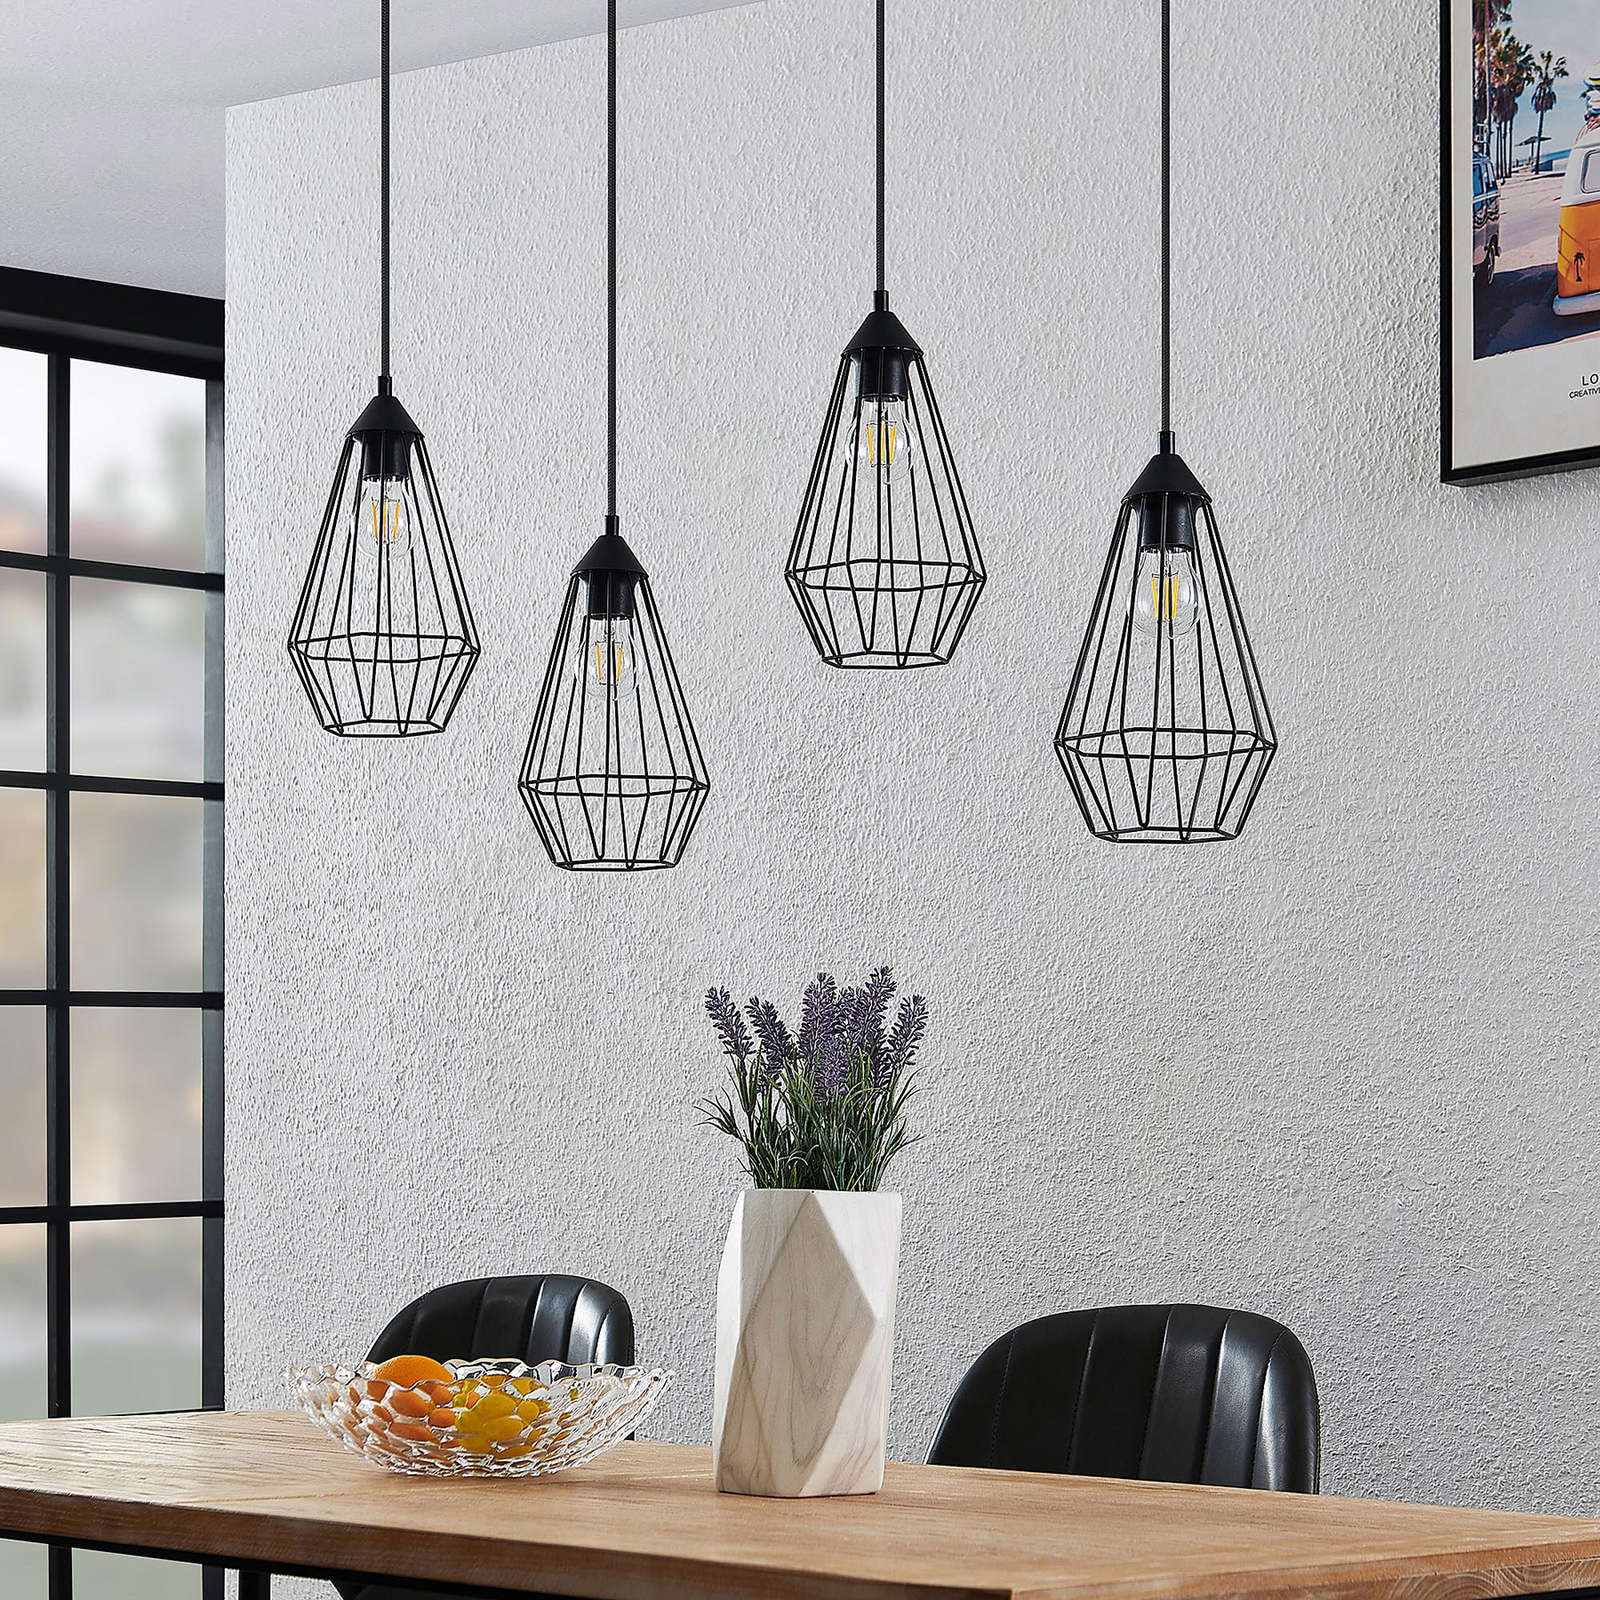 Lindby Remus cage hanging light, 4-bulb